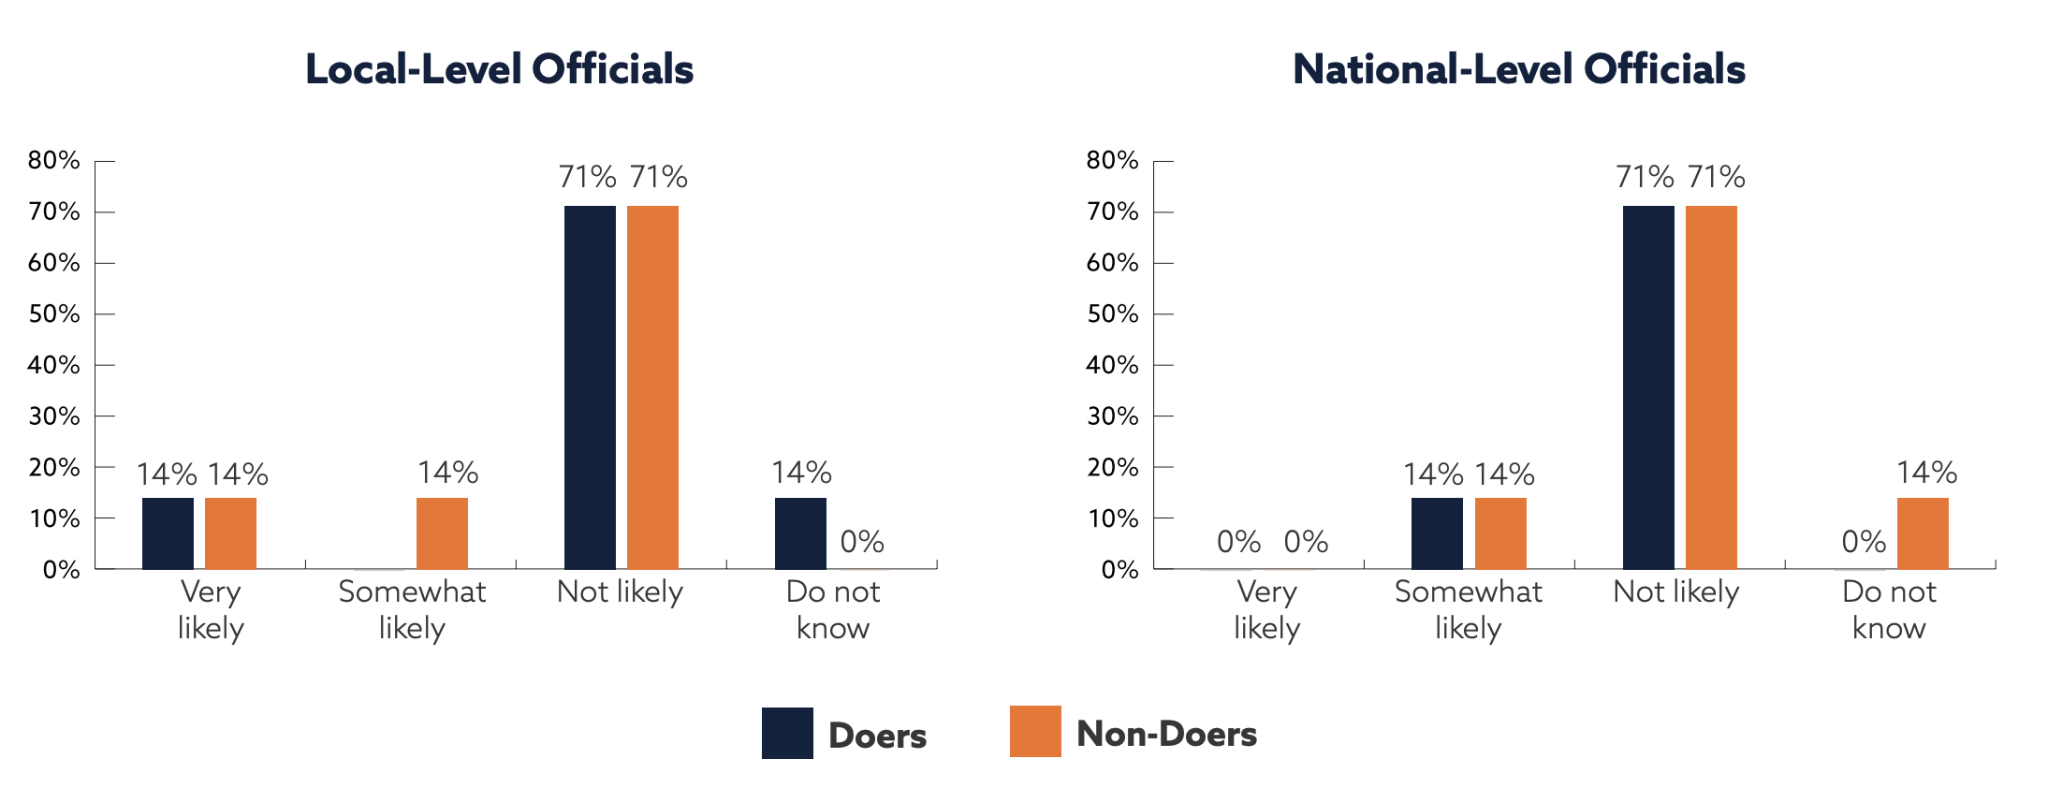 First bar chart: Local-level officials.  Doers: Very likely 14%; somewhat likely (no value listed); not likely 71%; do not know 14%.  Non-doers: Very likely 14%; somewhat likely 14%; not likely 71%; do not know 0%.

Second bar chart: National-level officials.  Doers: Very likely 0%; somewhat likely 14%; not likely 71%; do not know 0%.  Non-doers: Very likely 0%; somewhat likely 14%; not likely 71%; do not know 14%.